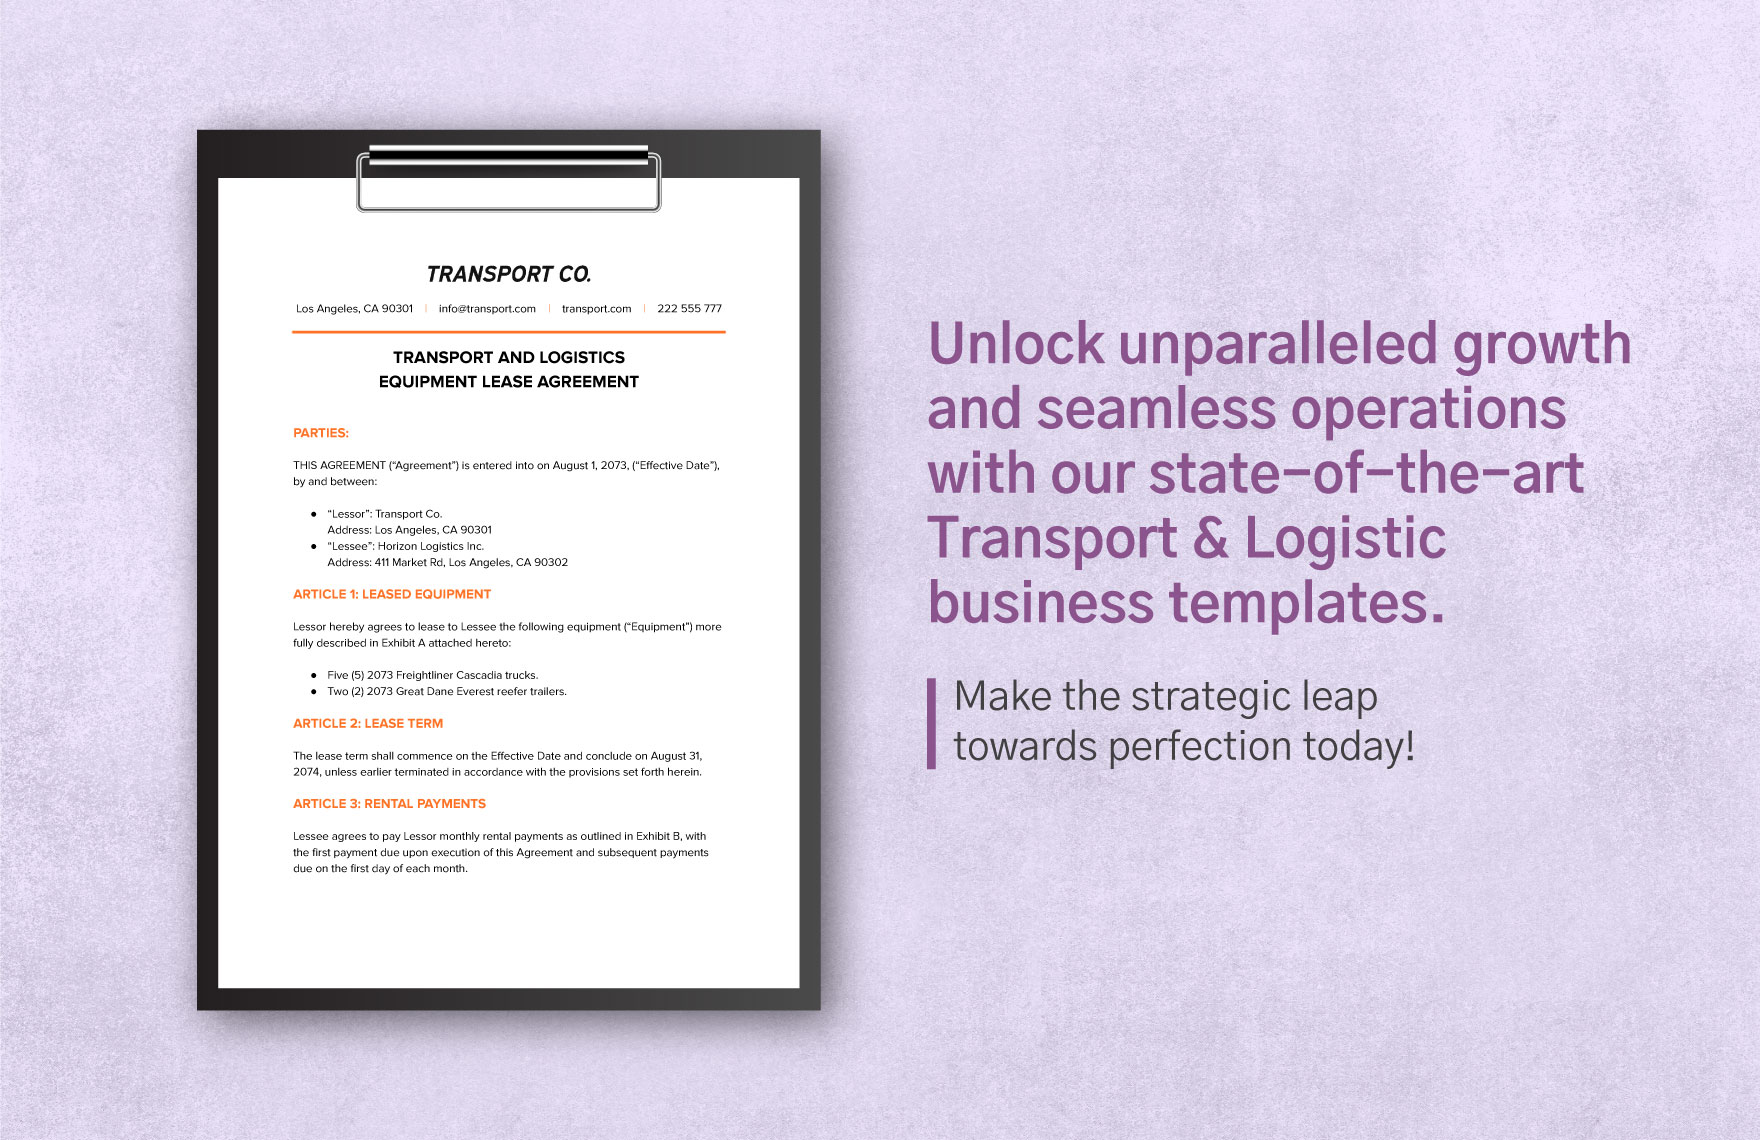 Transport and Logistics Equipment Lease Agreement Template